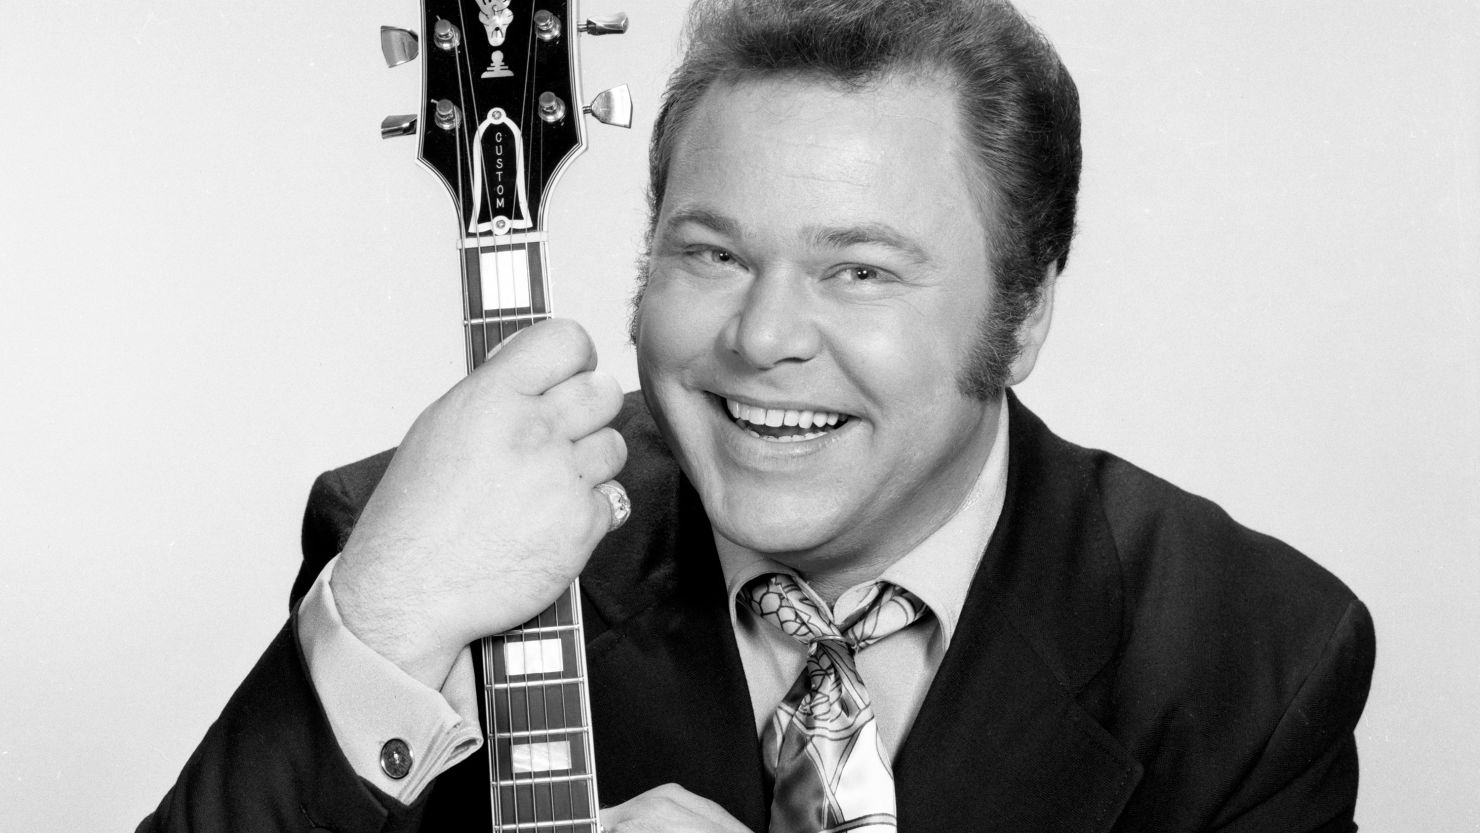 LOS ANGELES - APRIL 25: Roy Clark, string instrument player and host of the CBS television country music and variety show, "Hee Haw." Image dated April 25, 1969. Los Angeles, CA. (Photo by CBS via Getty Images) 